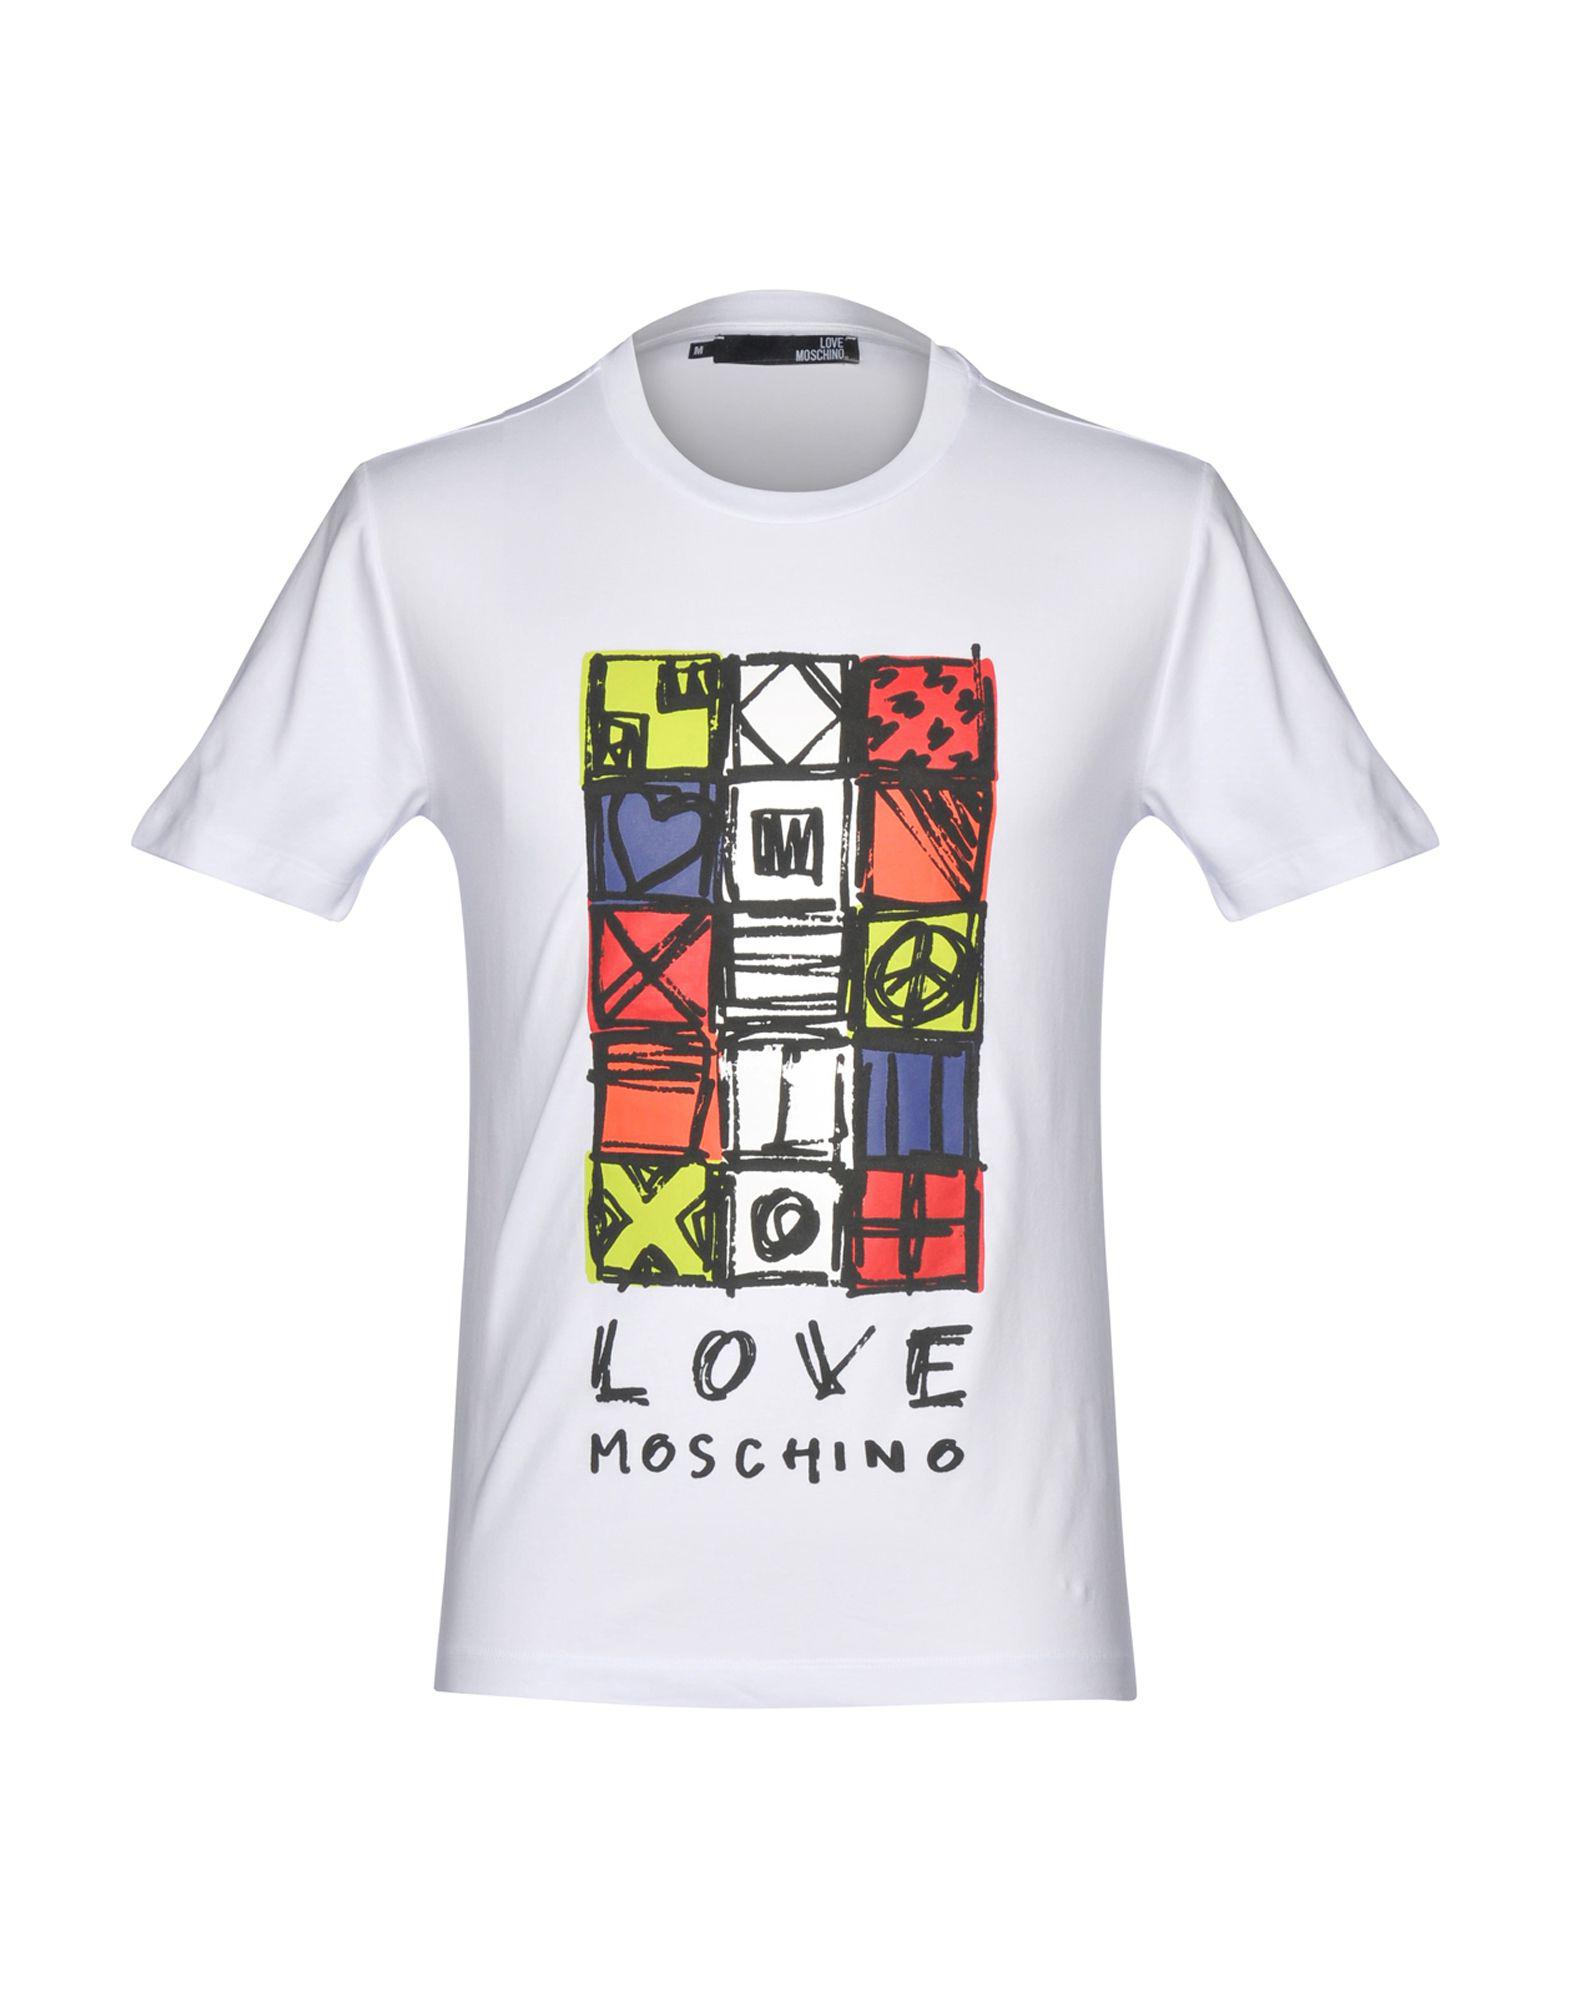 Love Moschino Cotton T-shirt in White for Men - Lyst